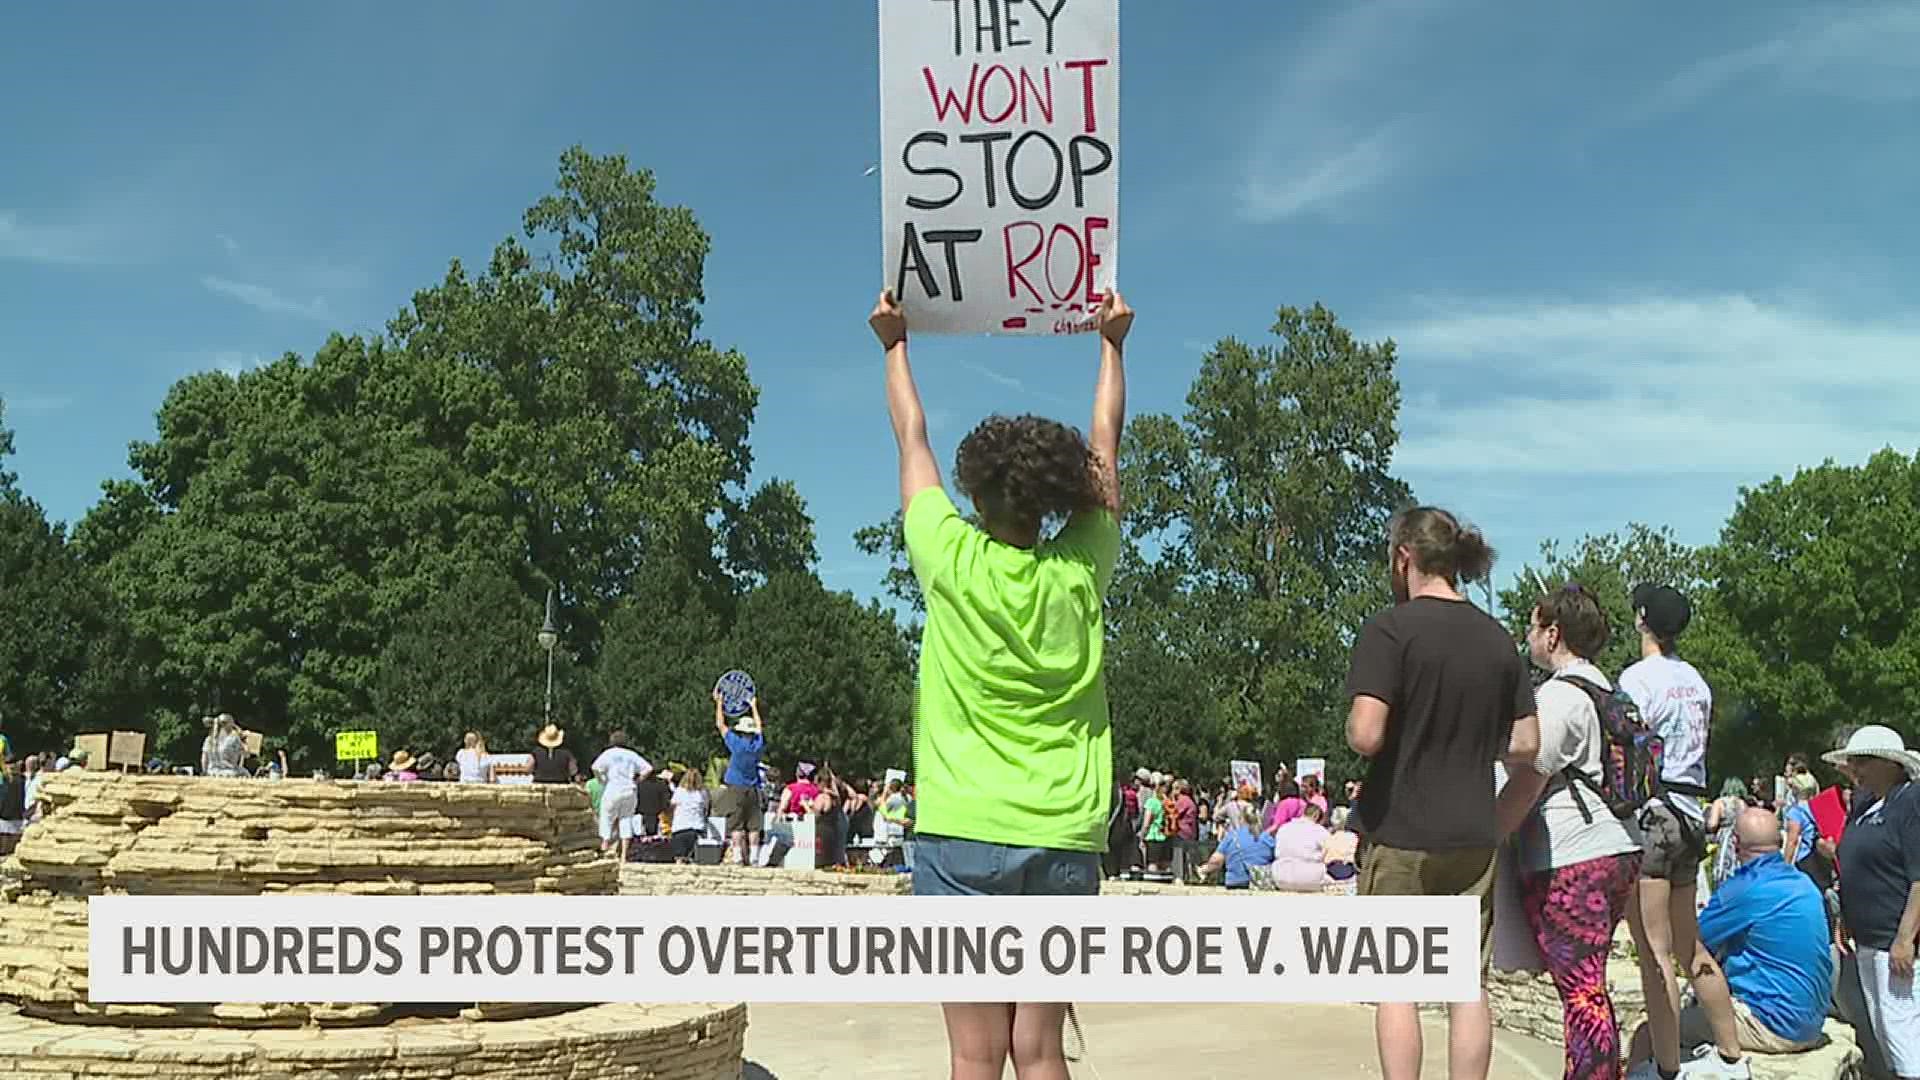 Protestors met in Vander Veer Park in Davenport and then marched down the streets carrying signs and demanding change.